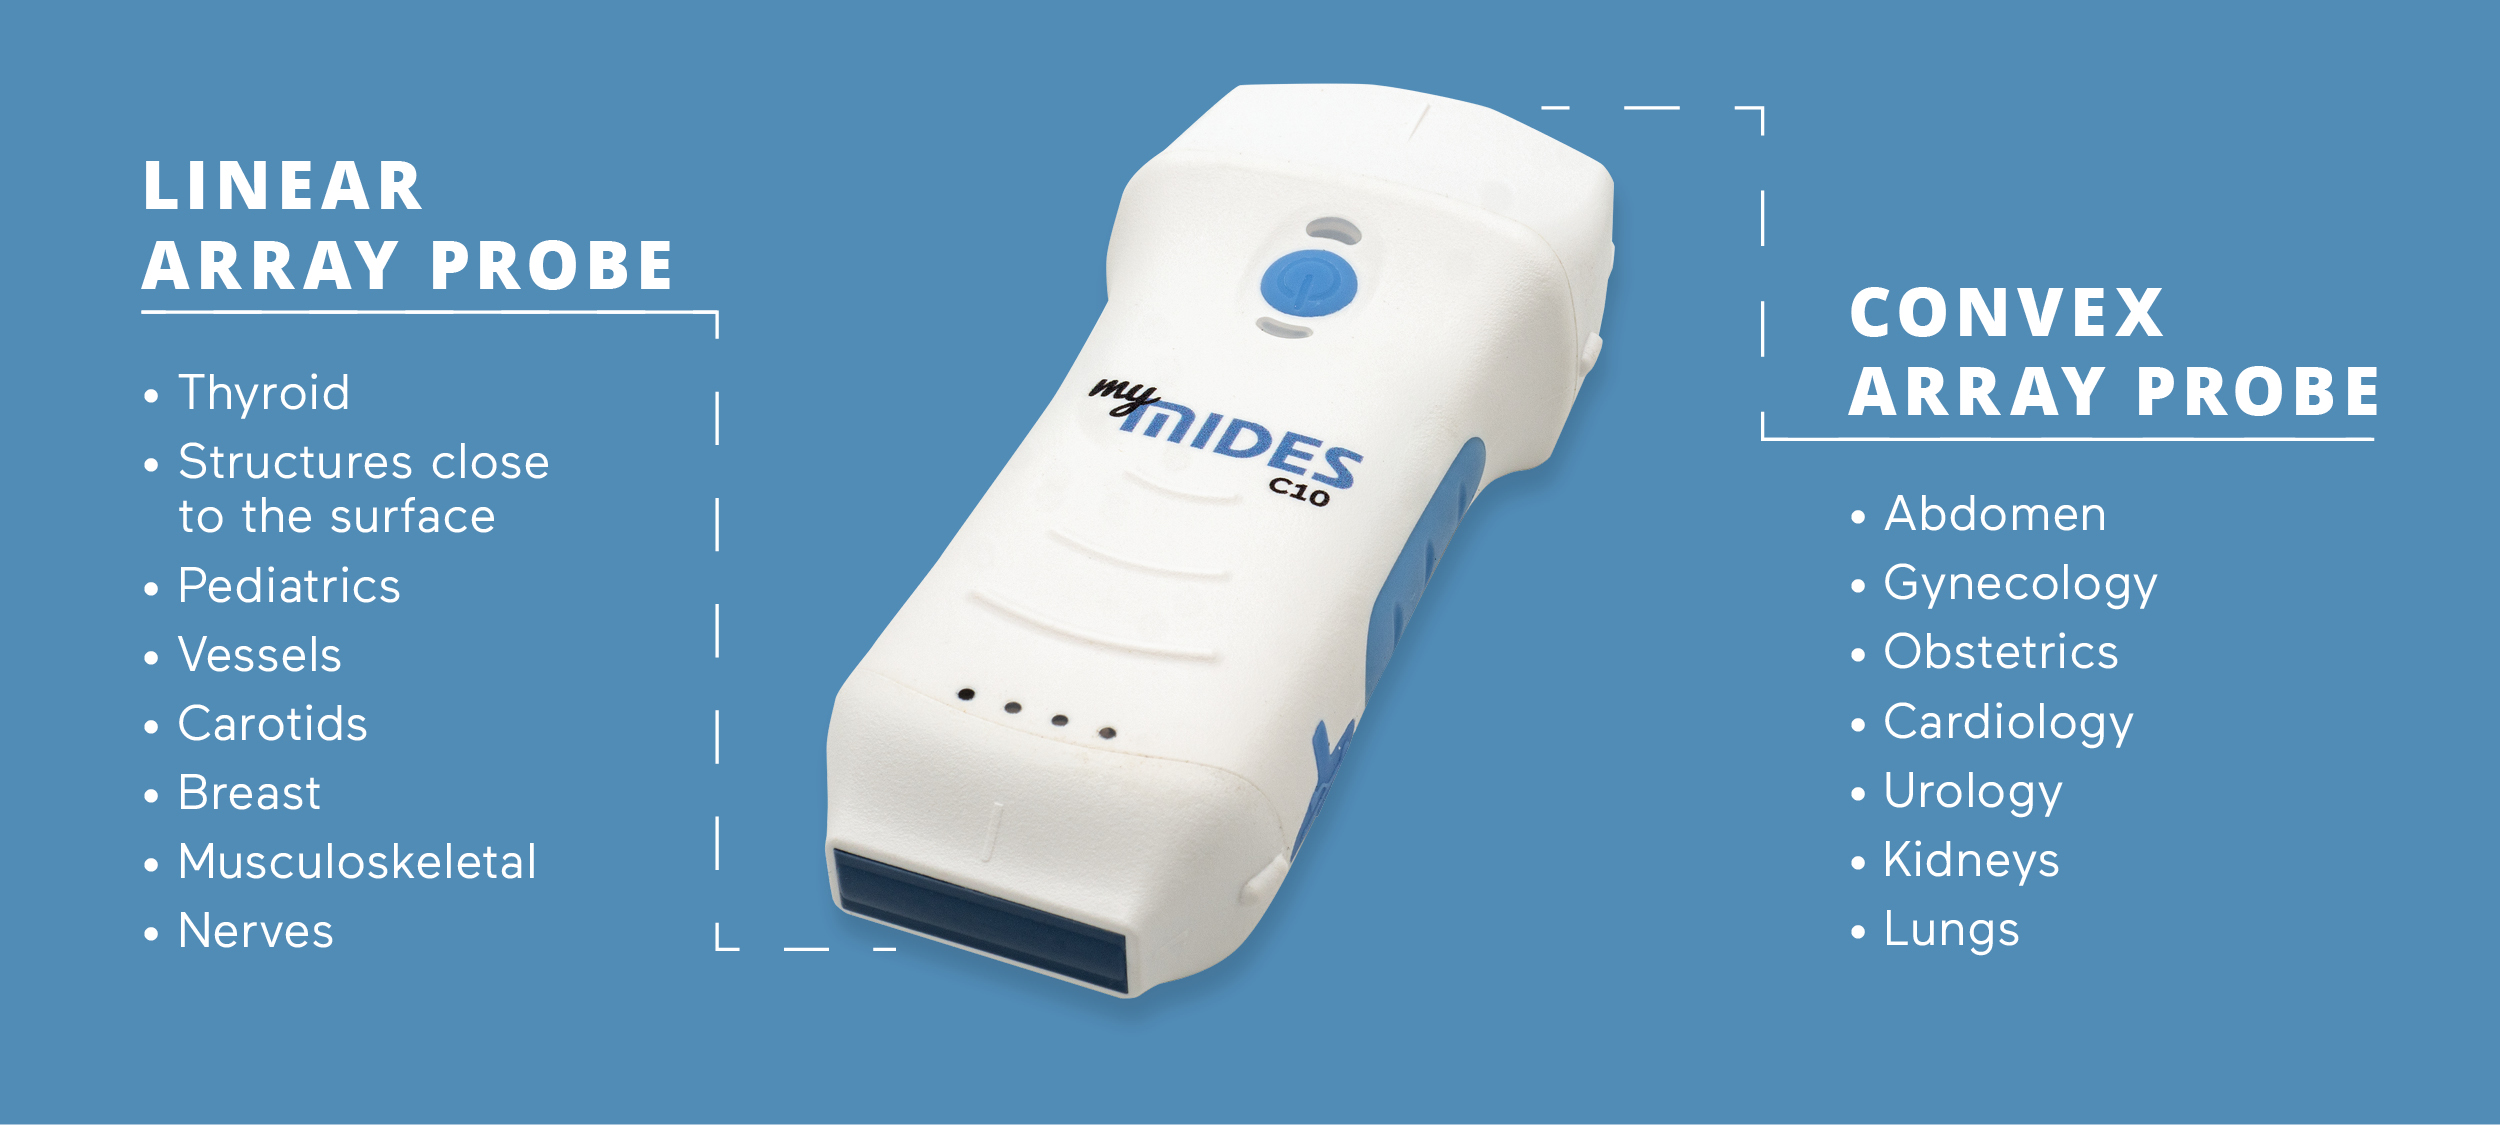 mobile ultrasound probe, myMIDES C10, areas of application for transducers